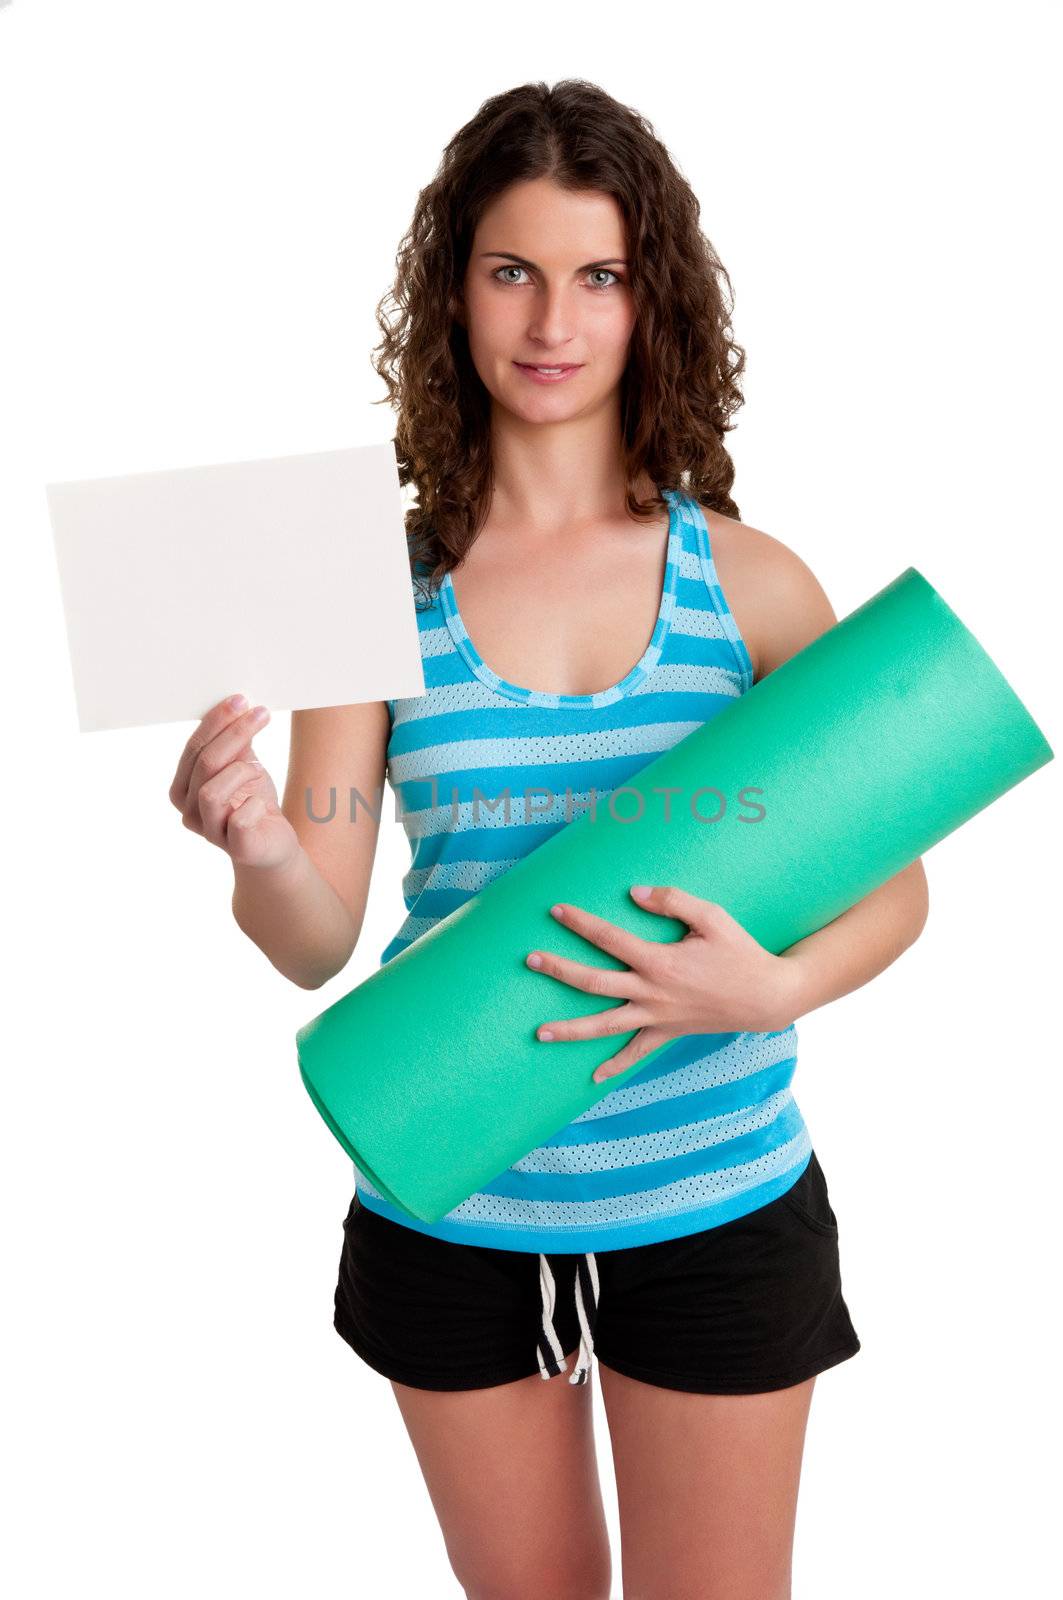 Woman Holding a Mat and a White Empty Card by ruigsantos